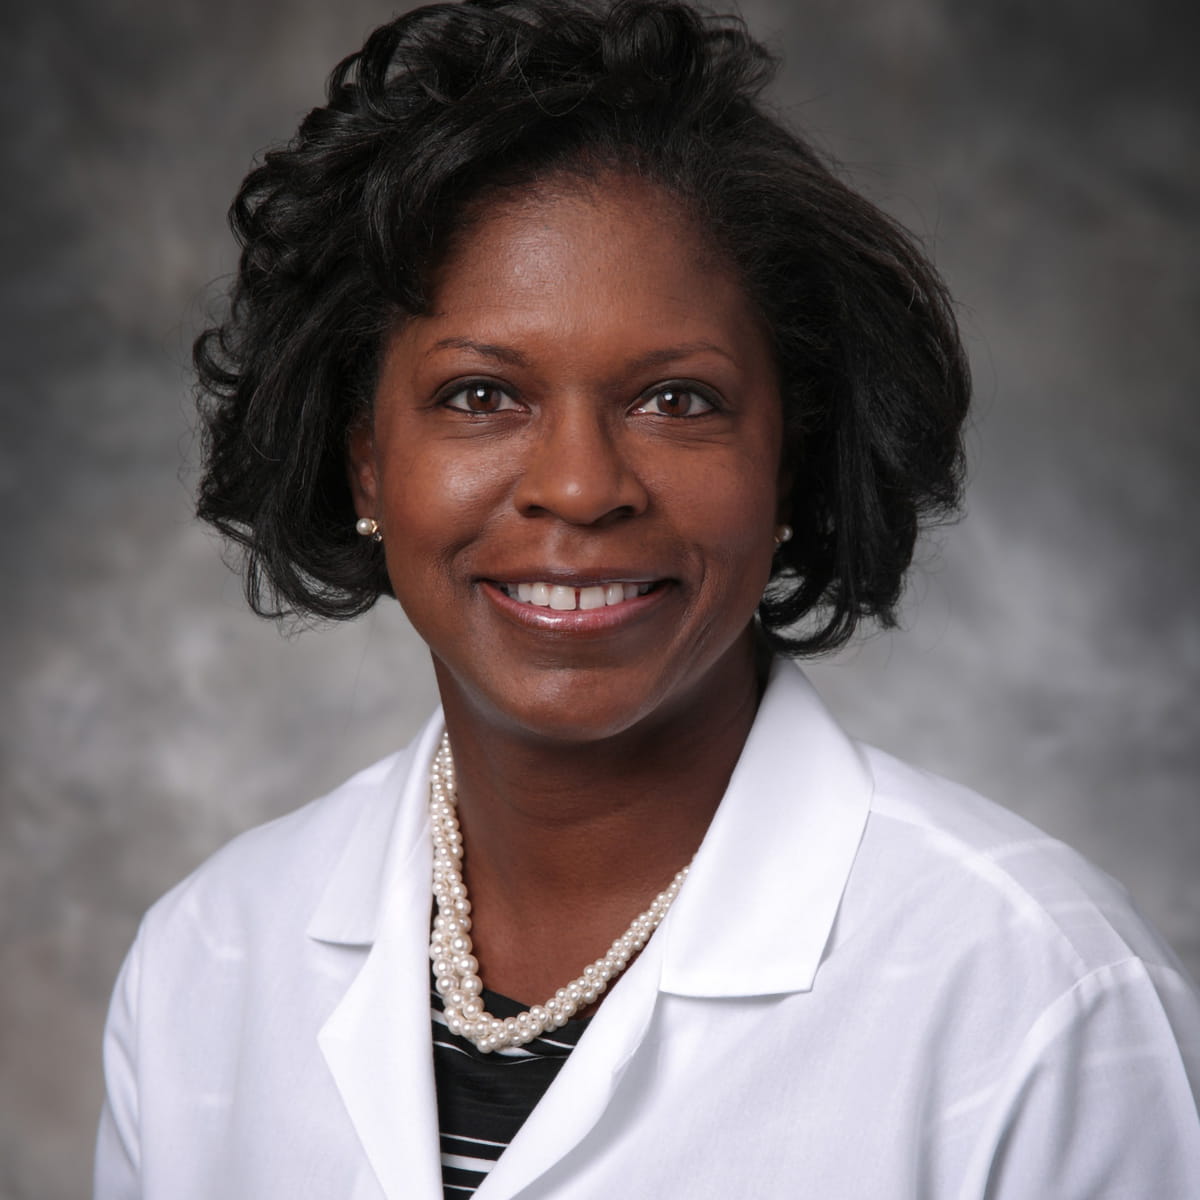 A friendly headshot of Sheri Campbell, MD